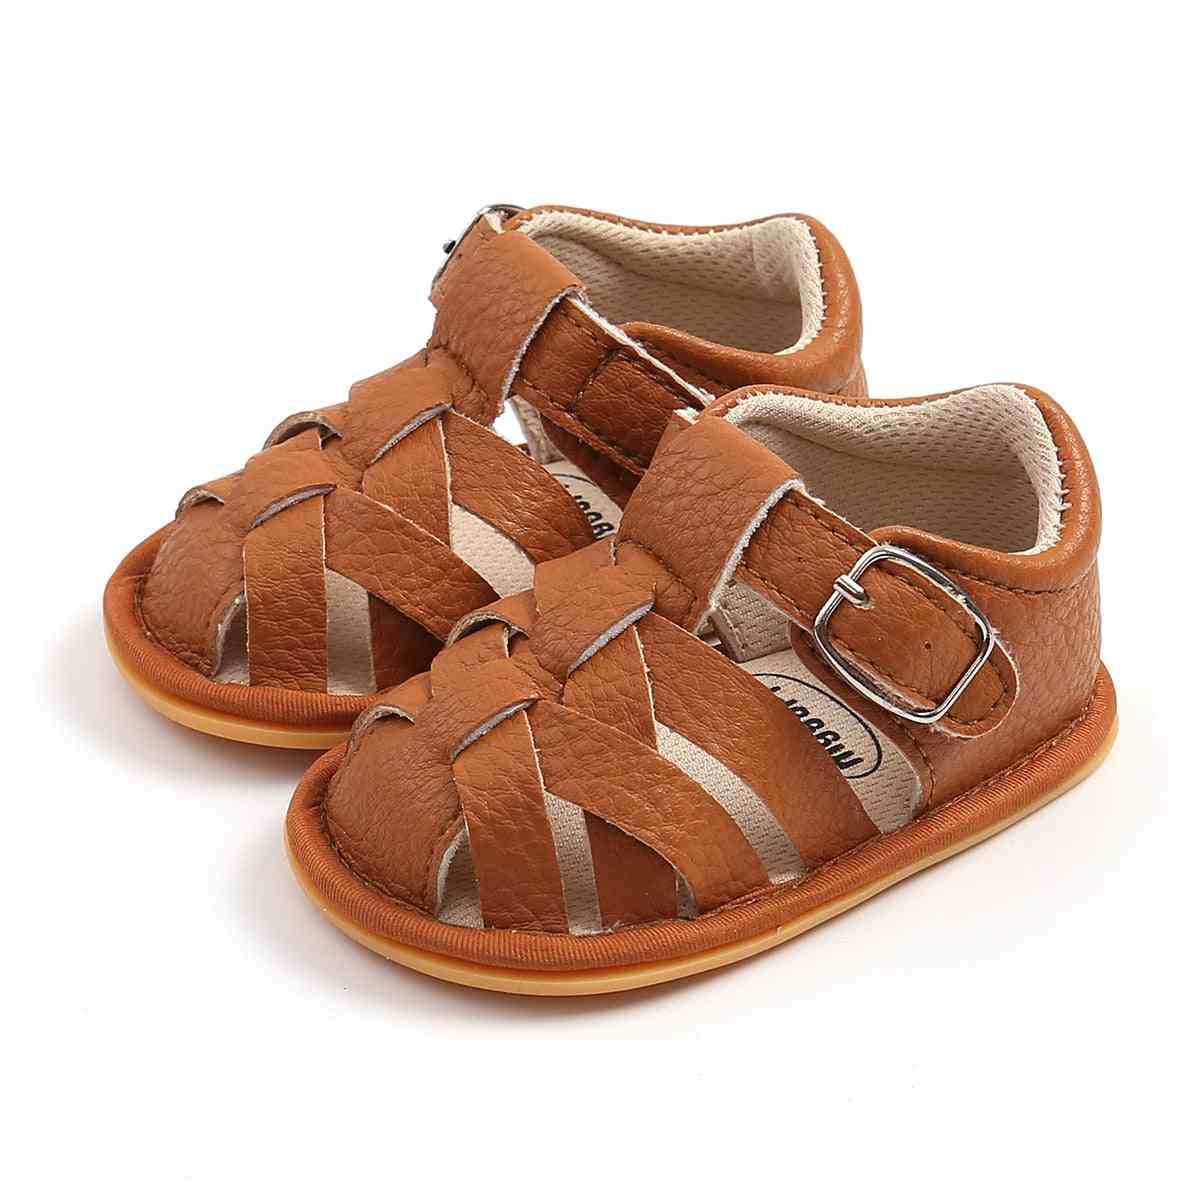 Soft Leather Baby Sandals, Toddlers Summer Little Shoes